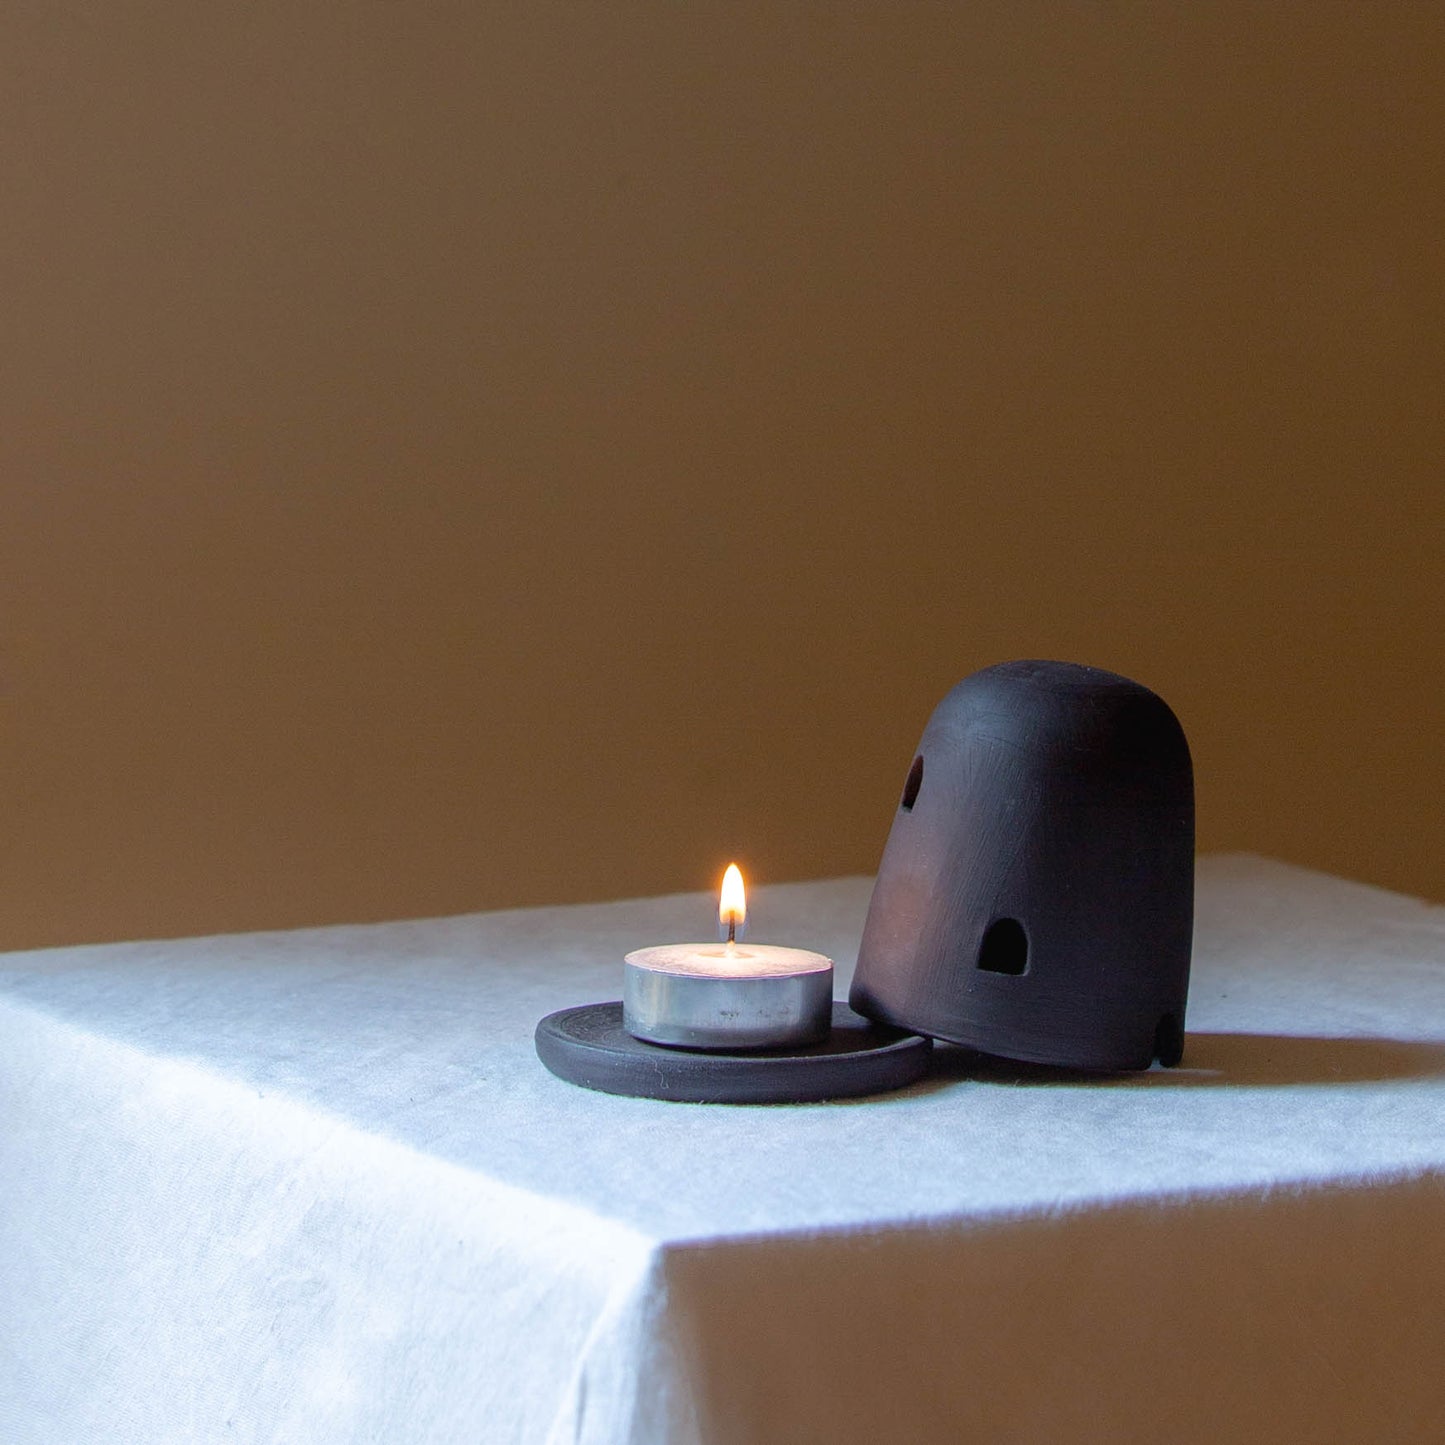 Black Dome Burner sitting on a white plinth with a lit candle. The dome burner has a smooth dome top with hand carved windows and sits on a dish.